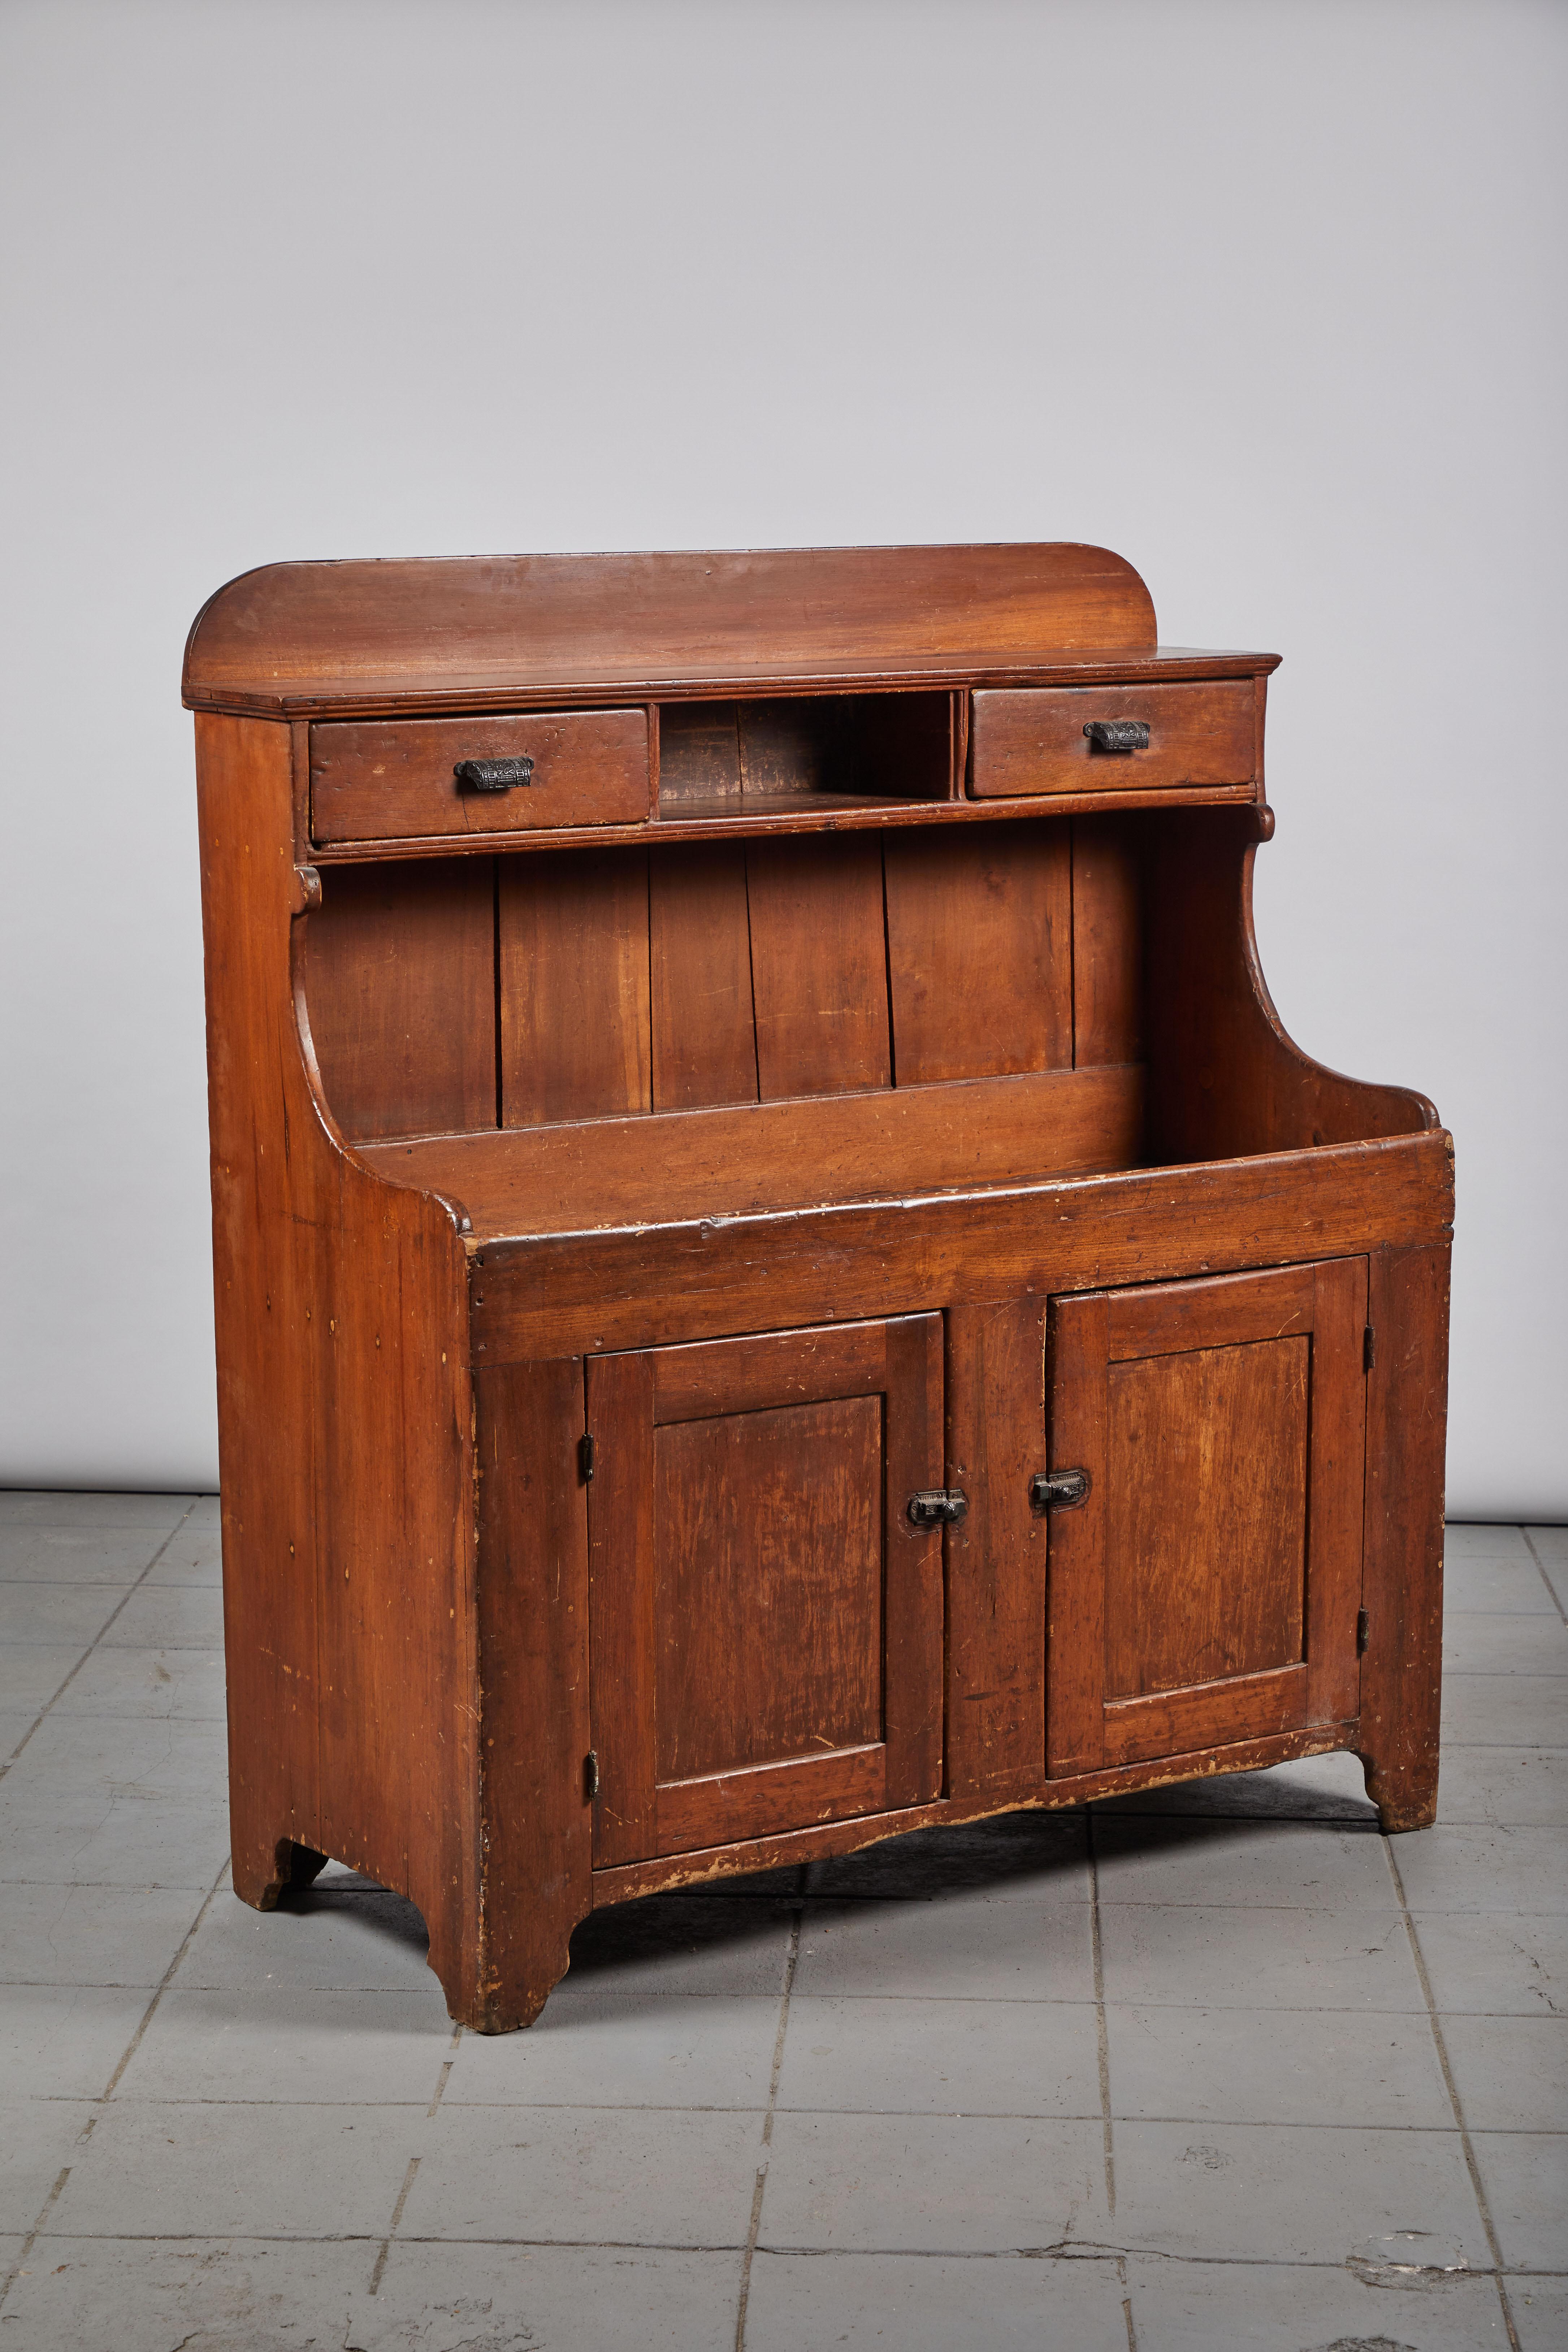 Wood Early American Two-Door Hutch